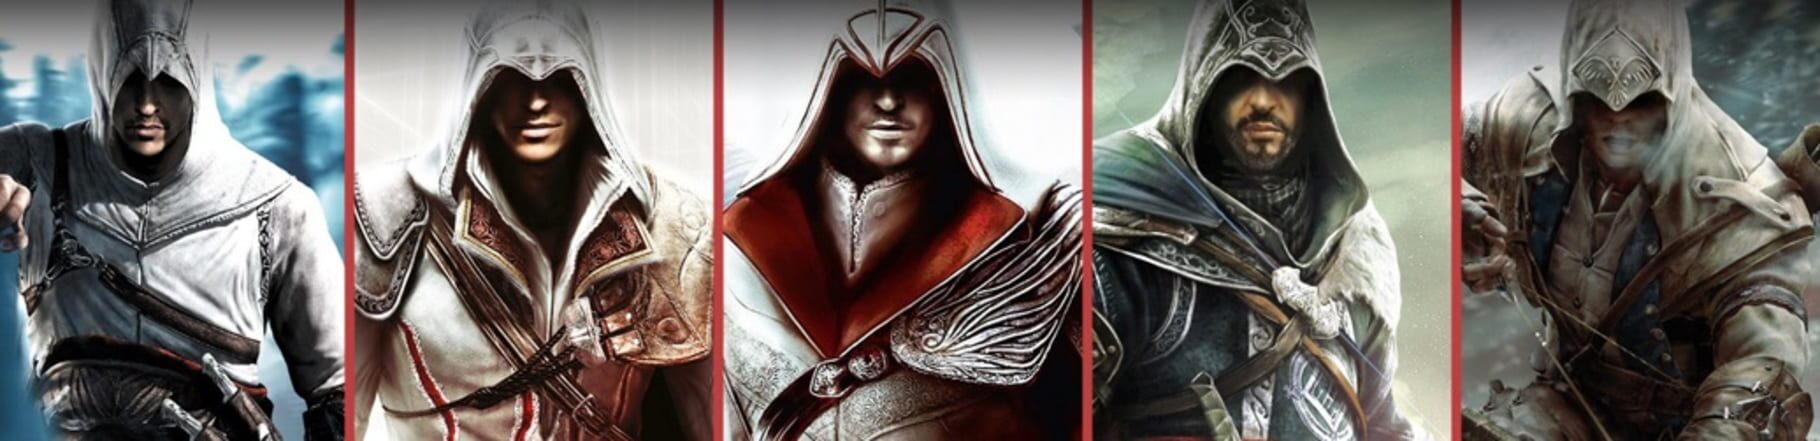 Assassin's Creed: Heritage Collection Image